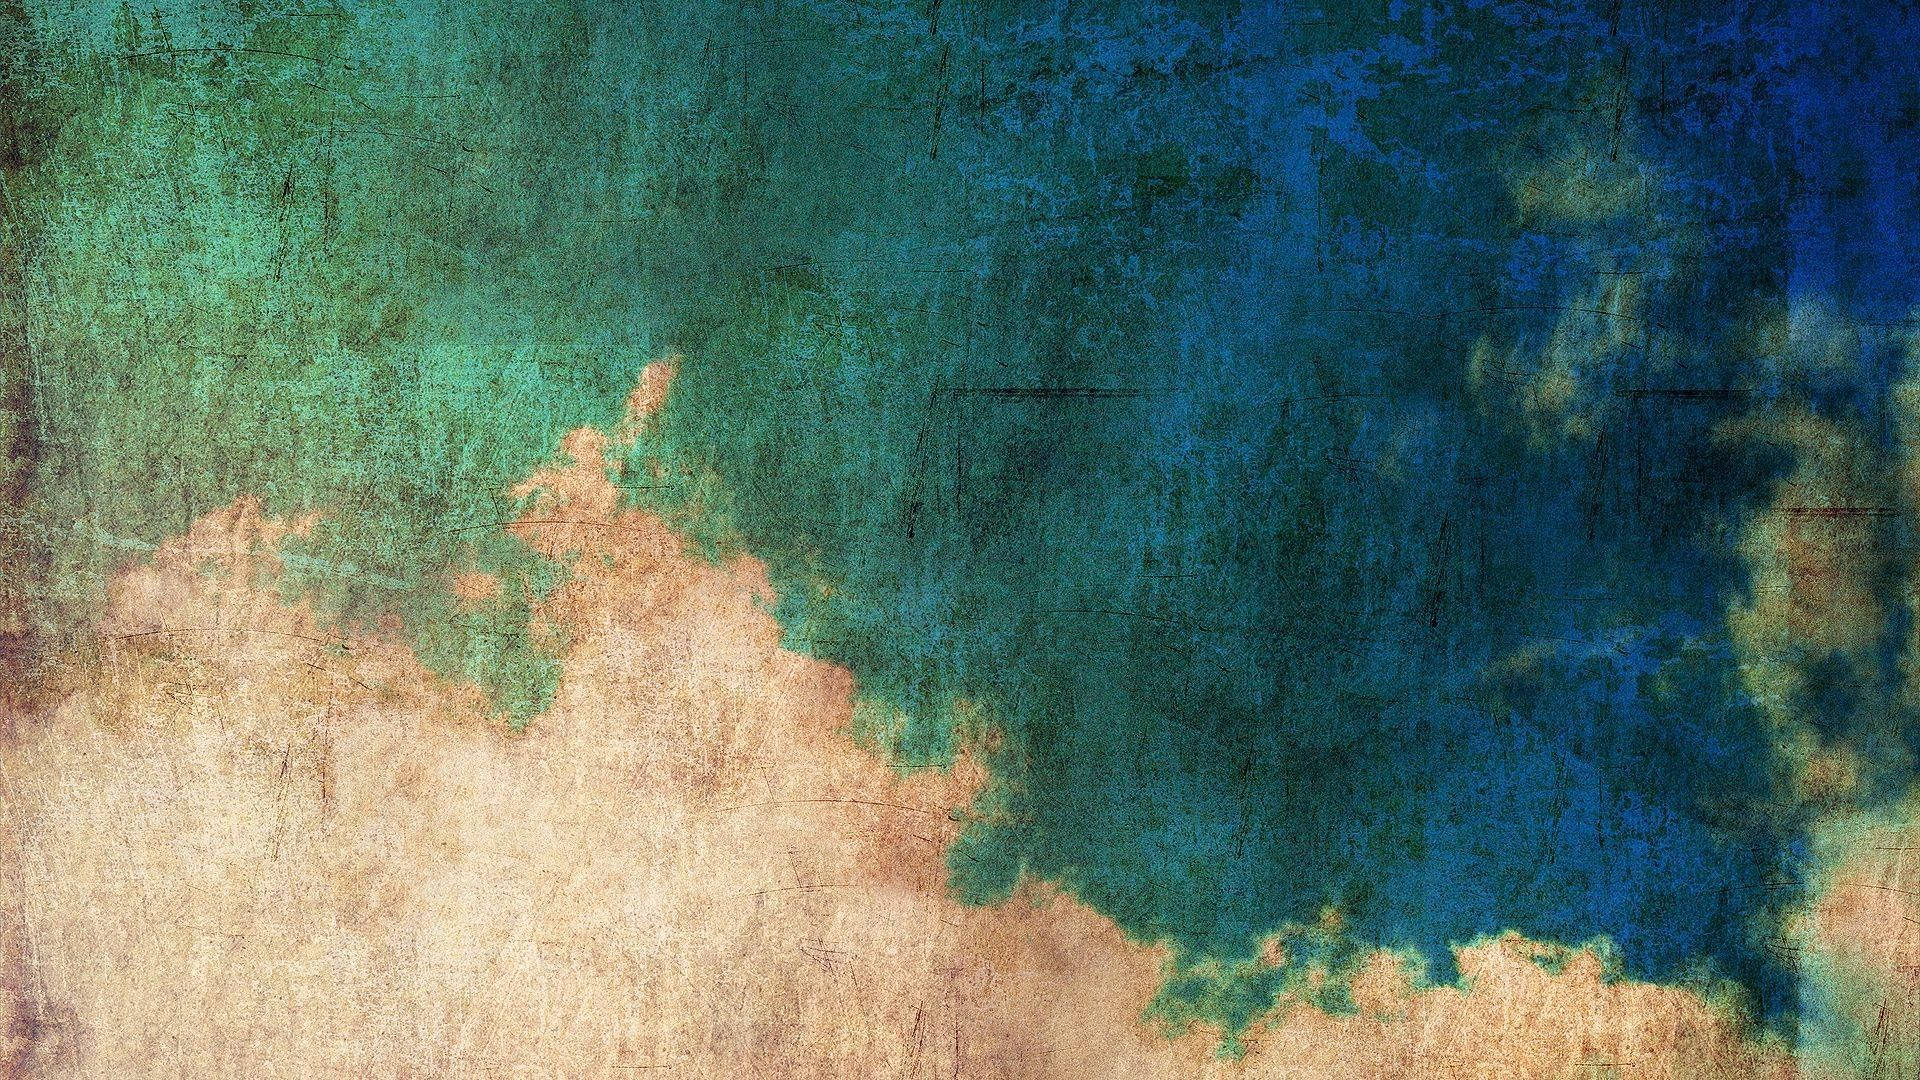 Faded Blue And Brown Paper Vintage Aesthetic Laptop Wallpaper